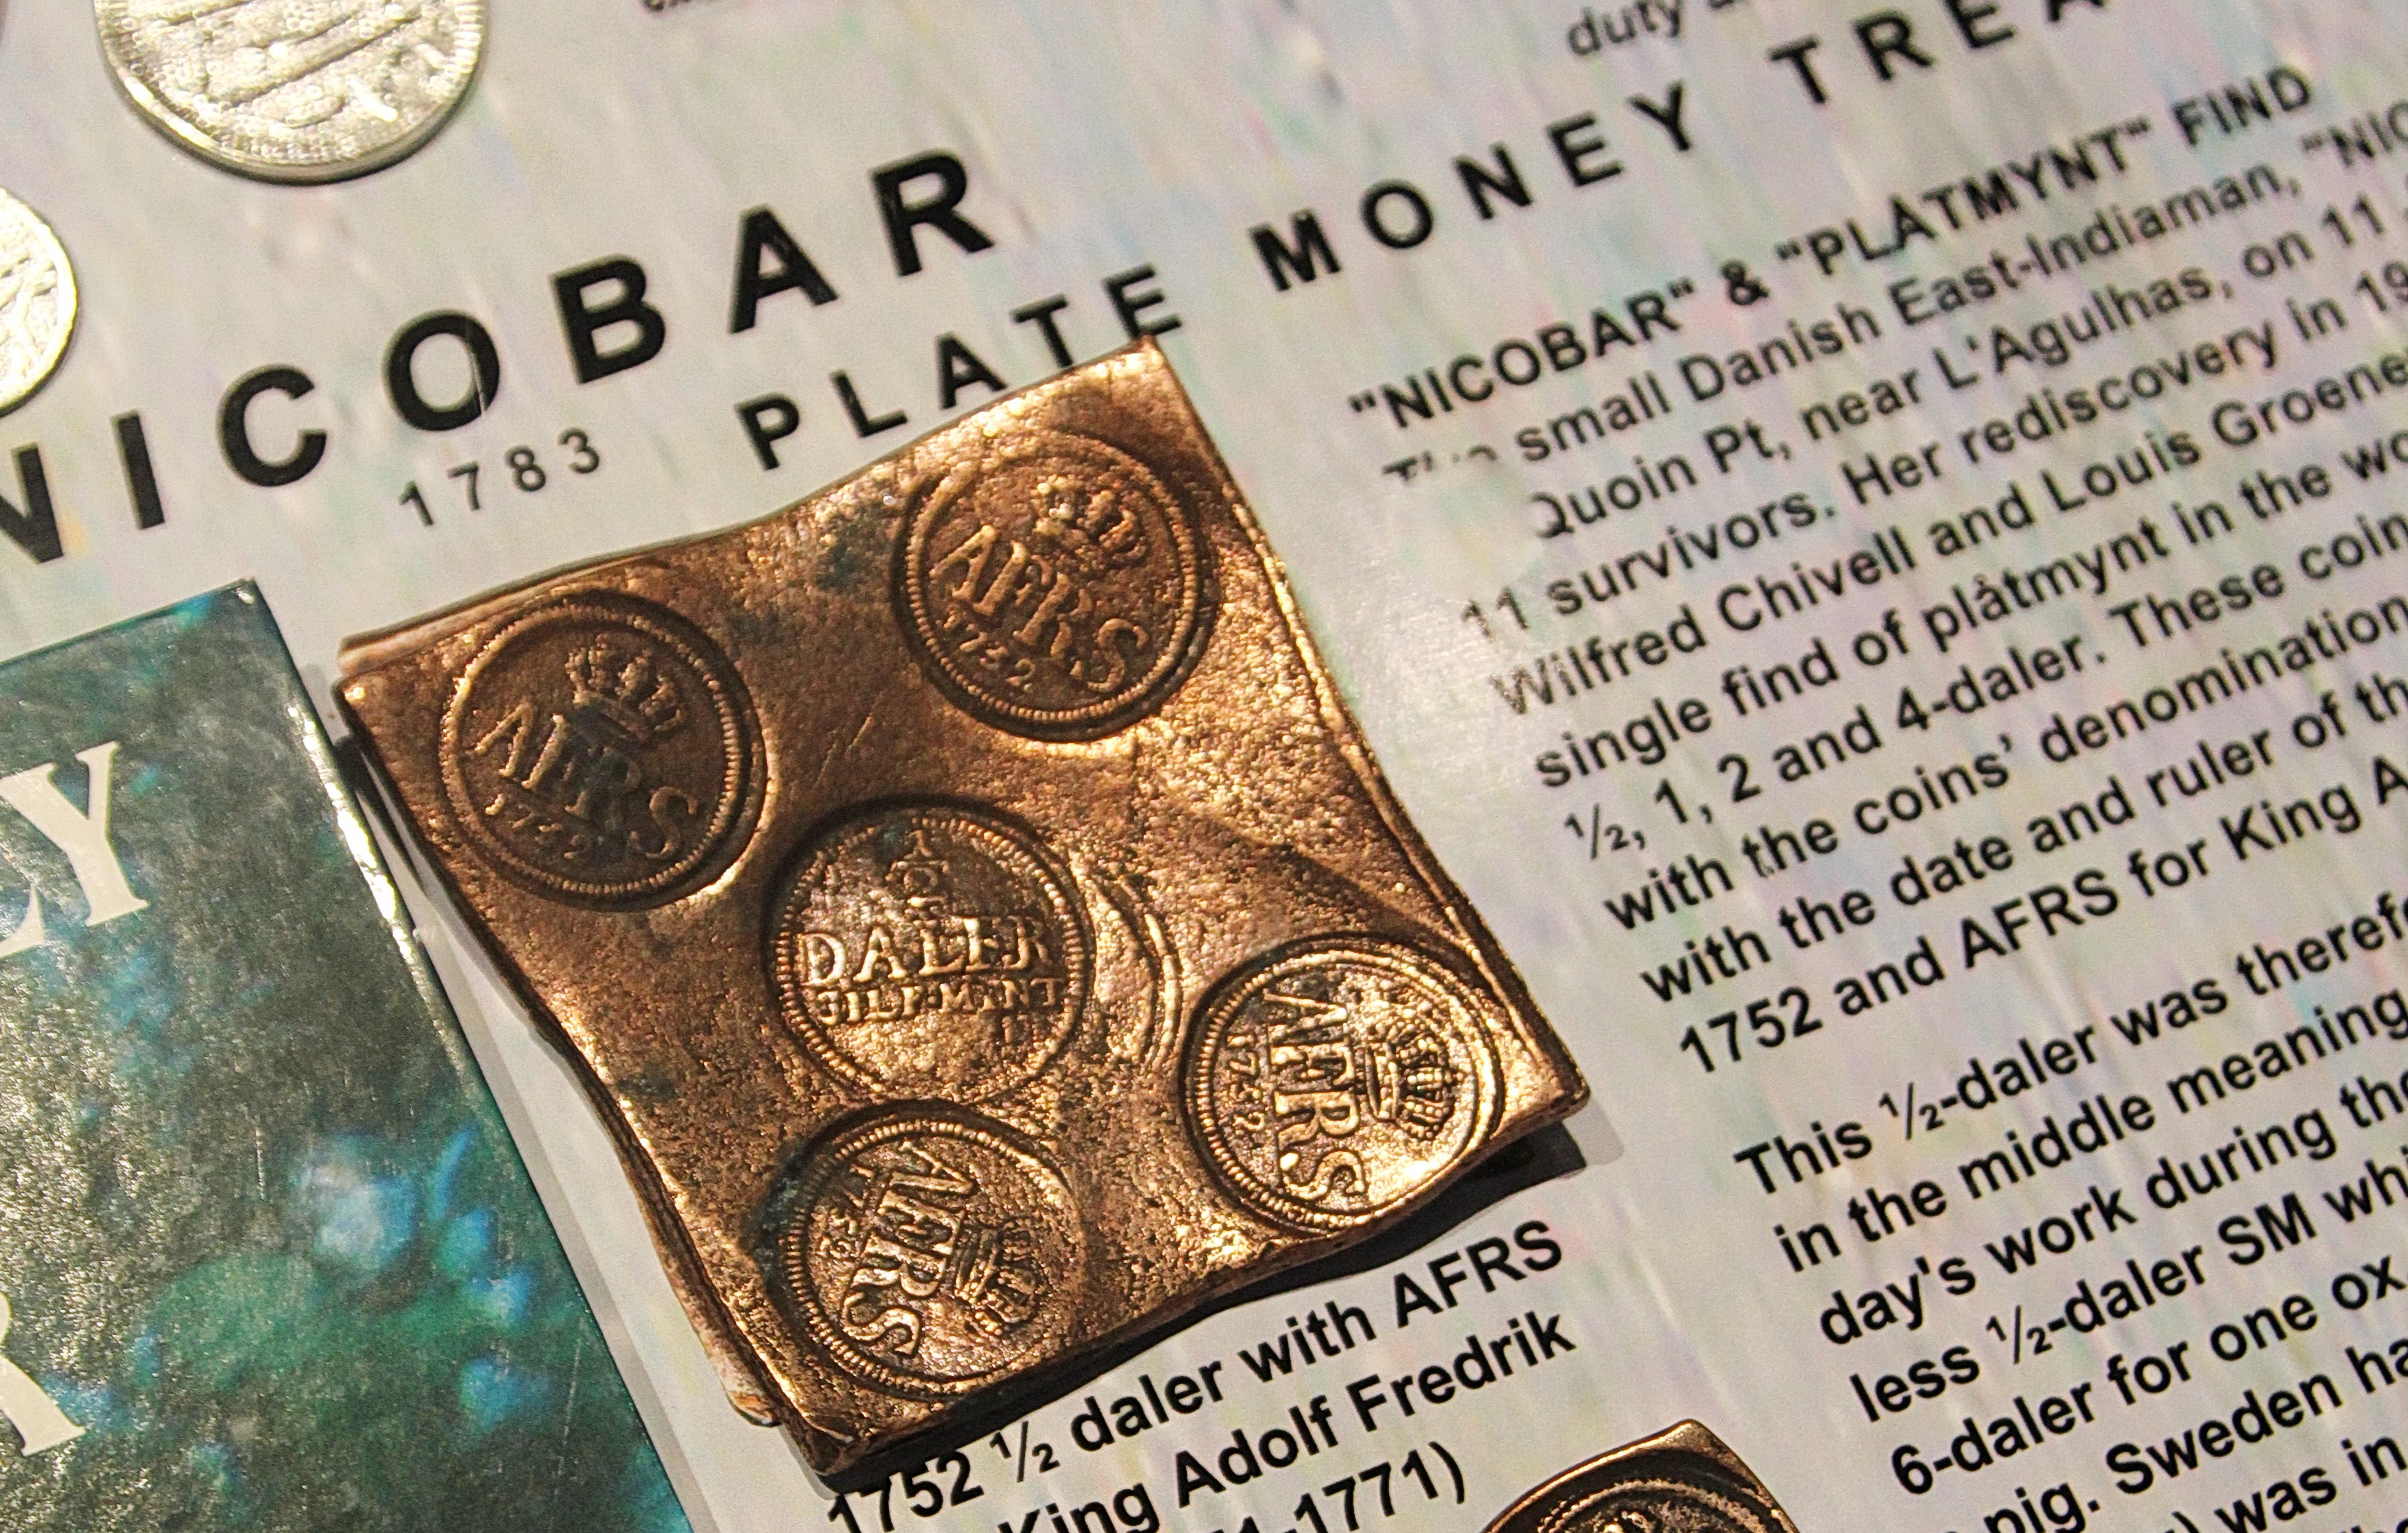 Plate money from the Nicobar, retrieved by Gansbaai conservationist Wilfred Chivell and a diving friend, Louis Groenewald. Photographer: Chris Marais